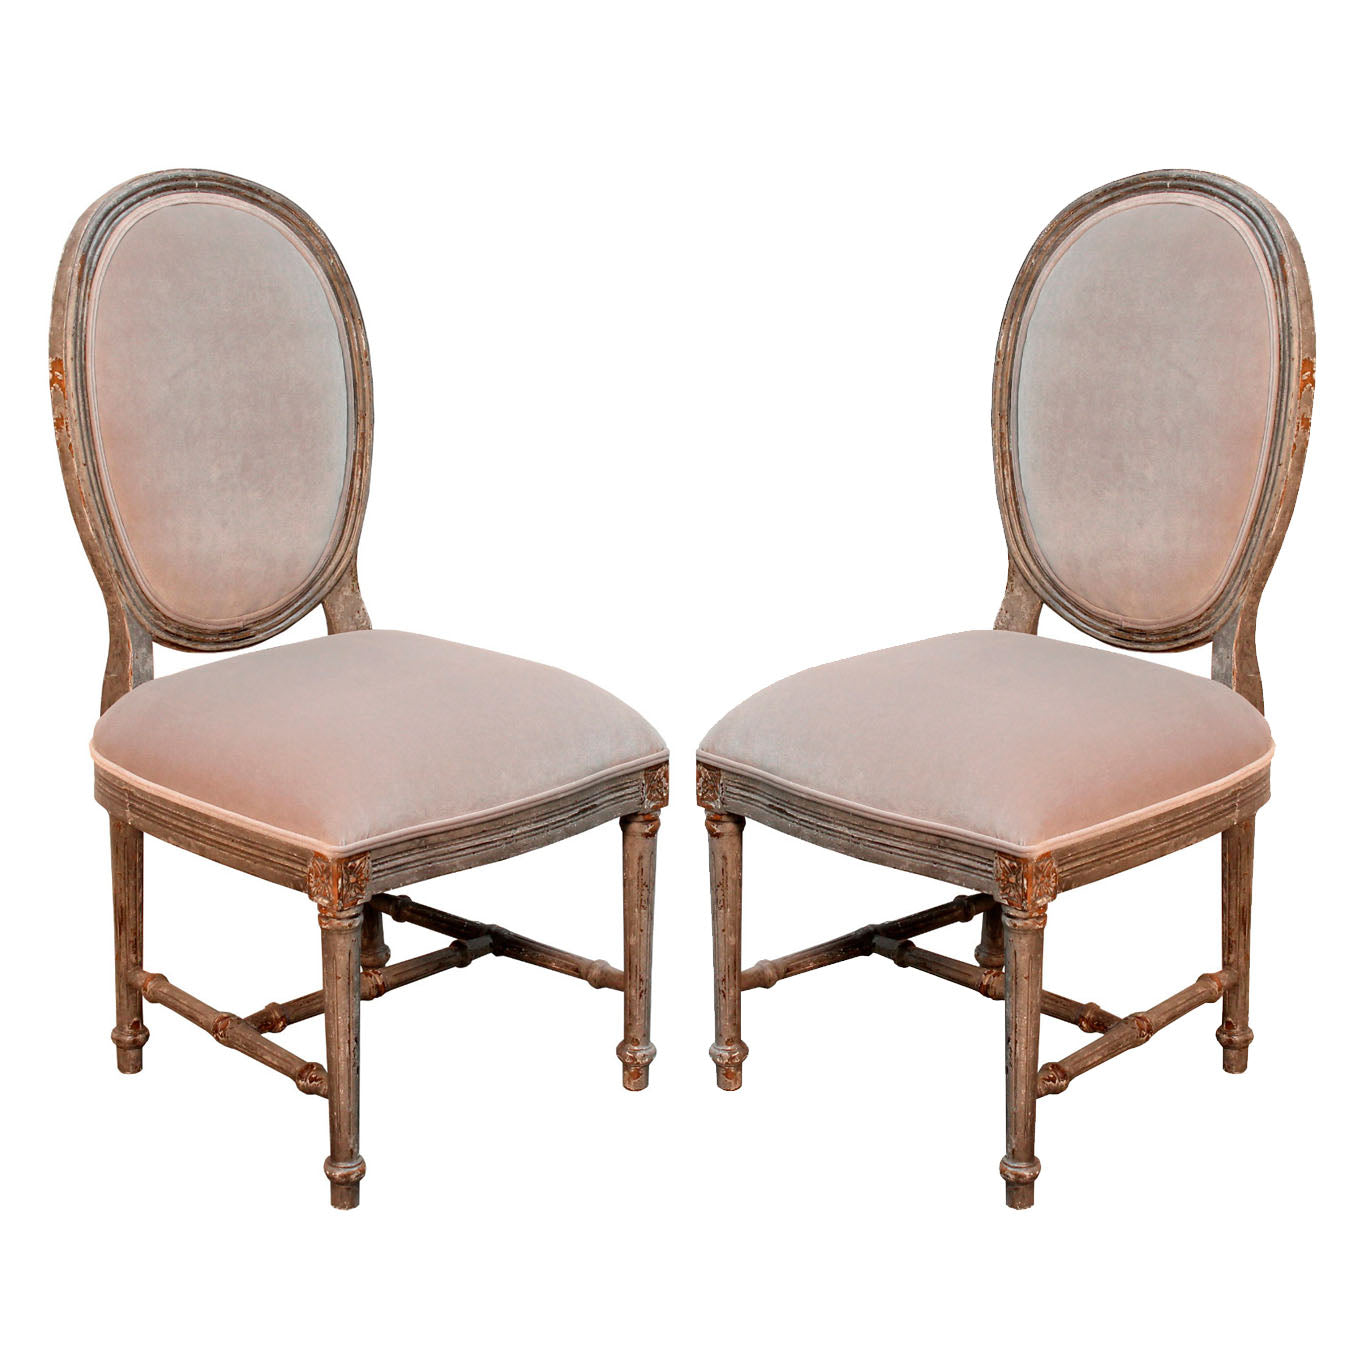 St. Germain French Dining Chair